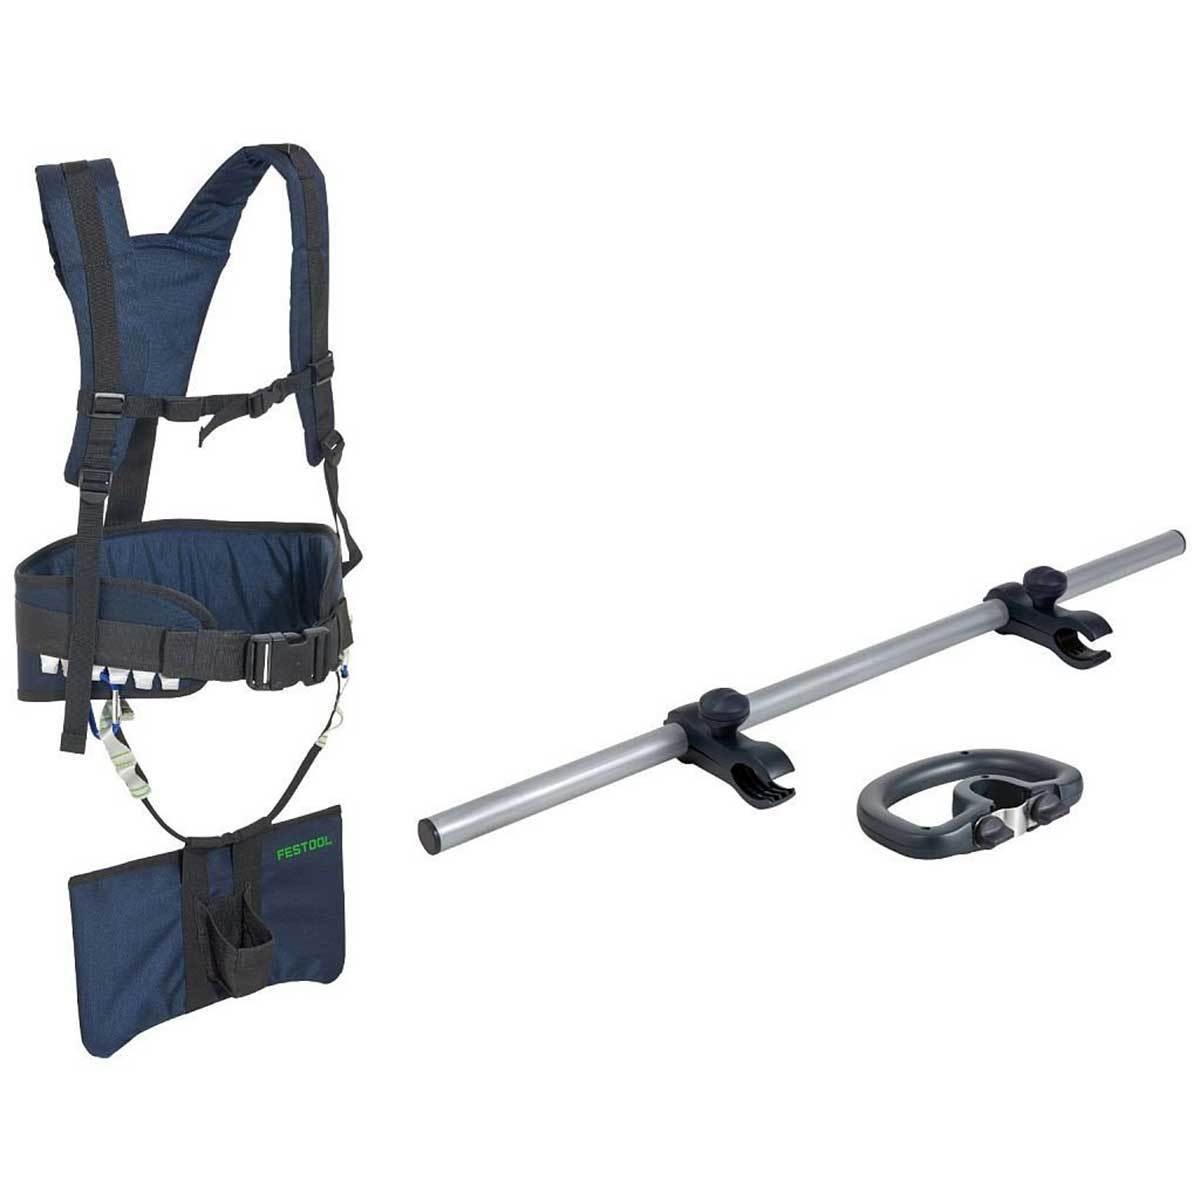 Planex Drywall Sander Support Harness